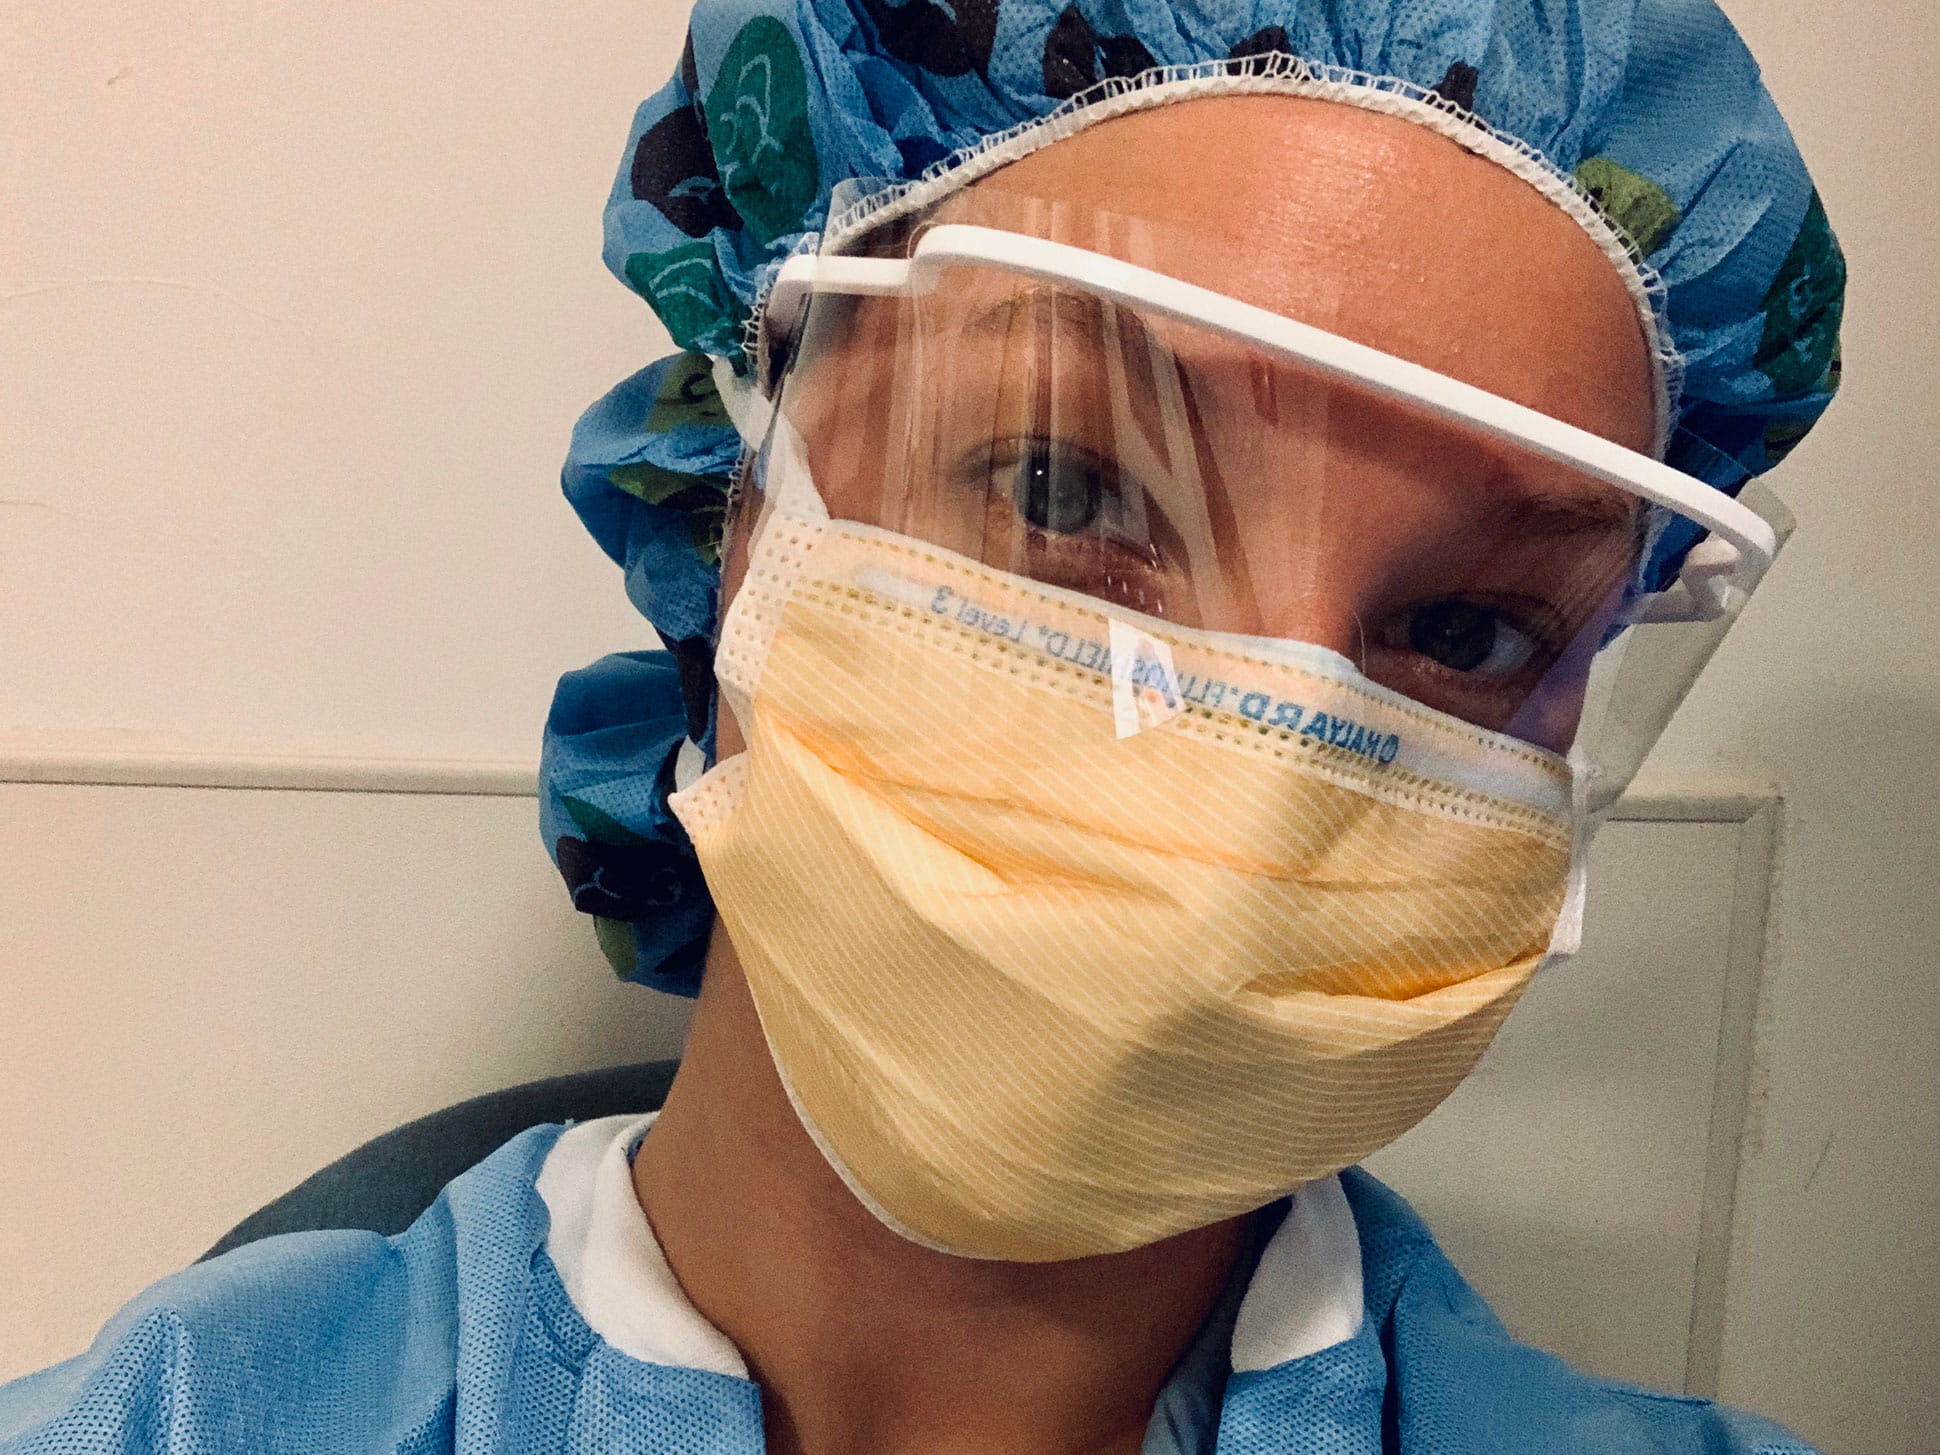 Marissa Czarnecki ’20 working at a Boston-area hospital during the COVID-19 pandemic